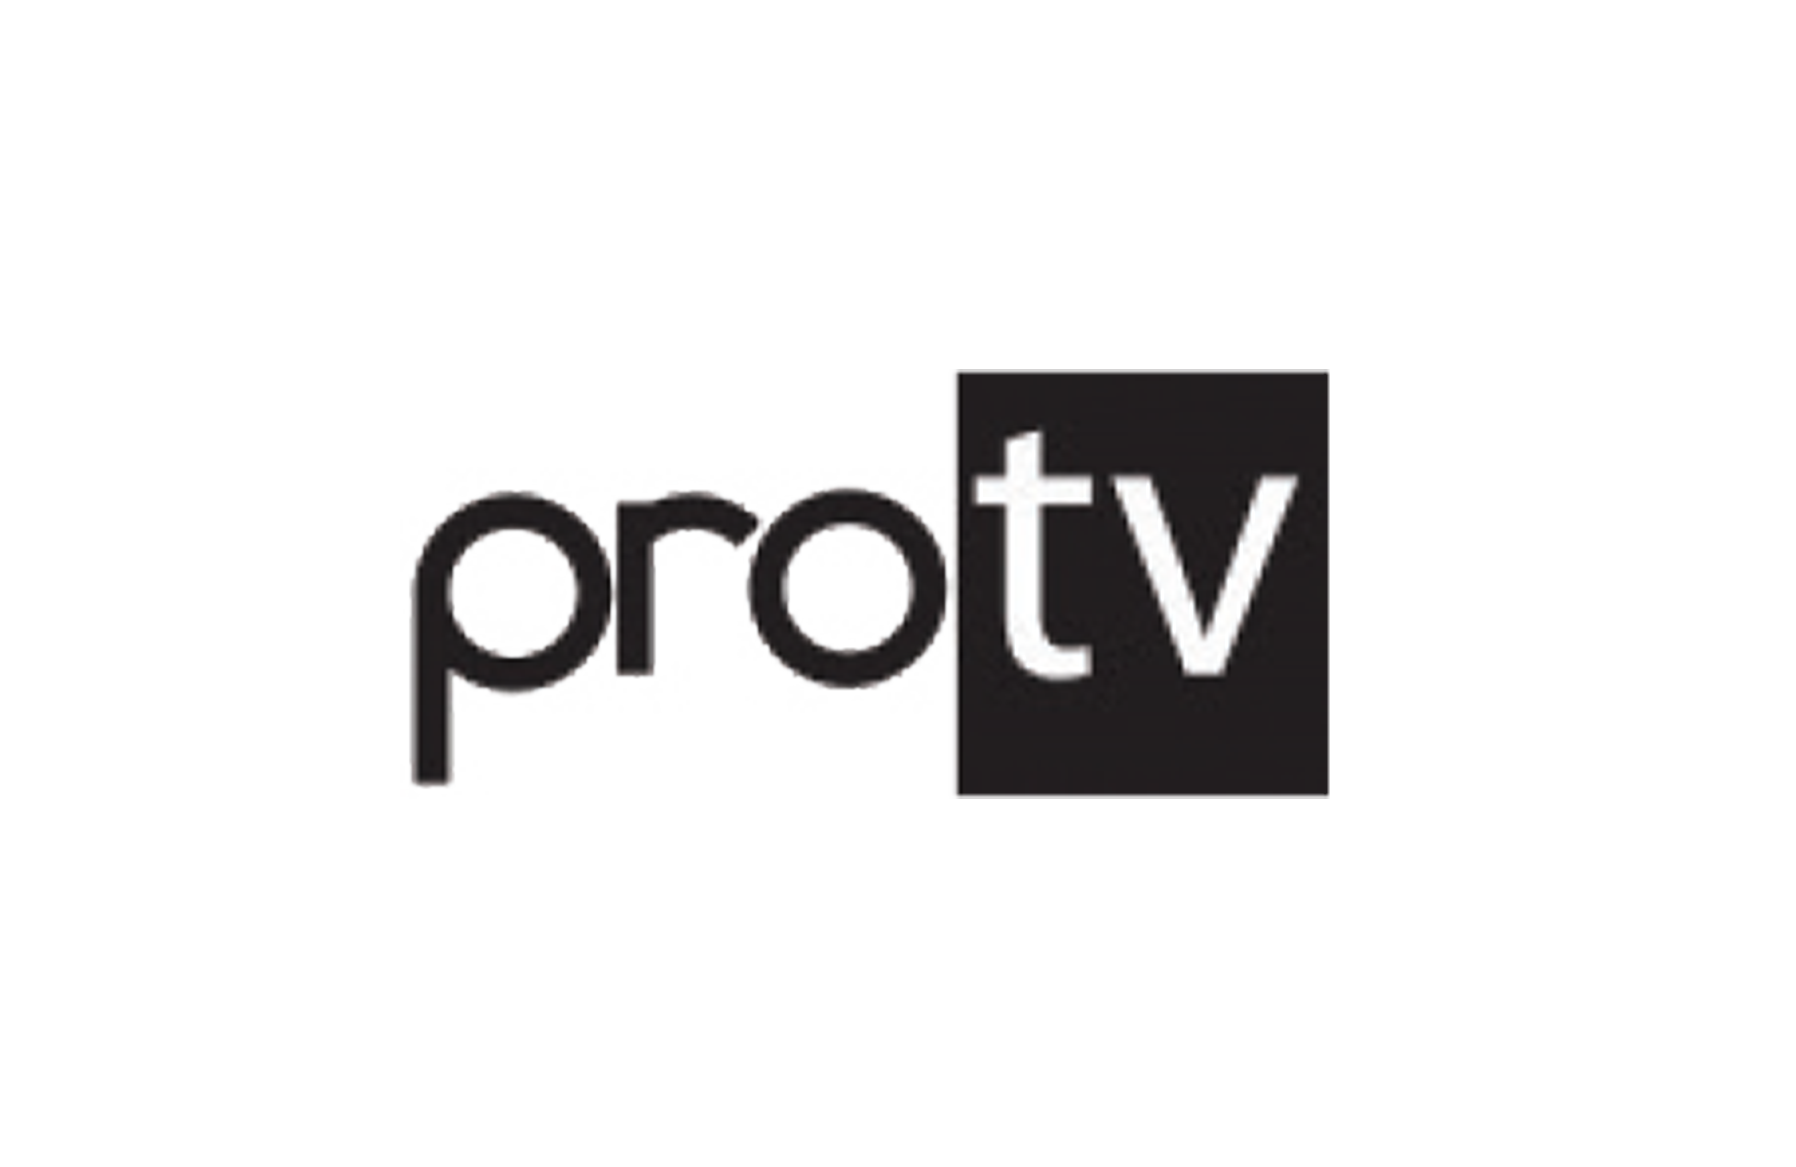 Protv.png